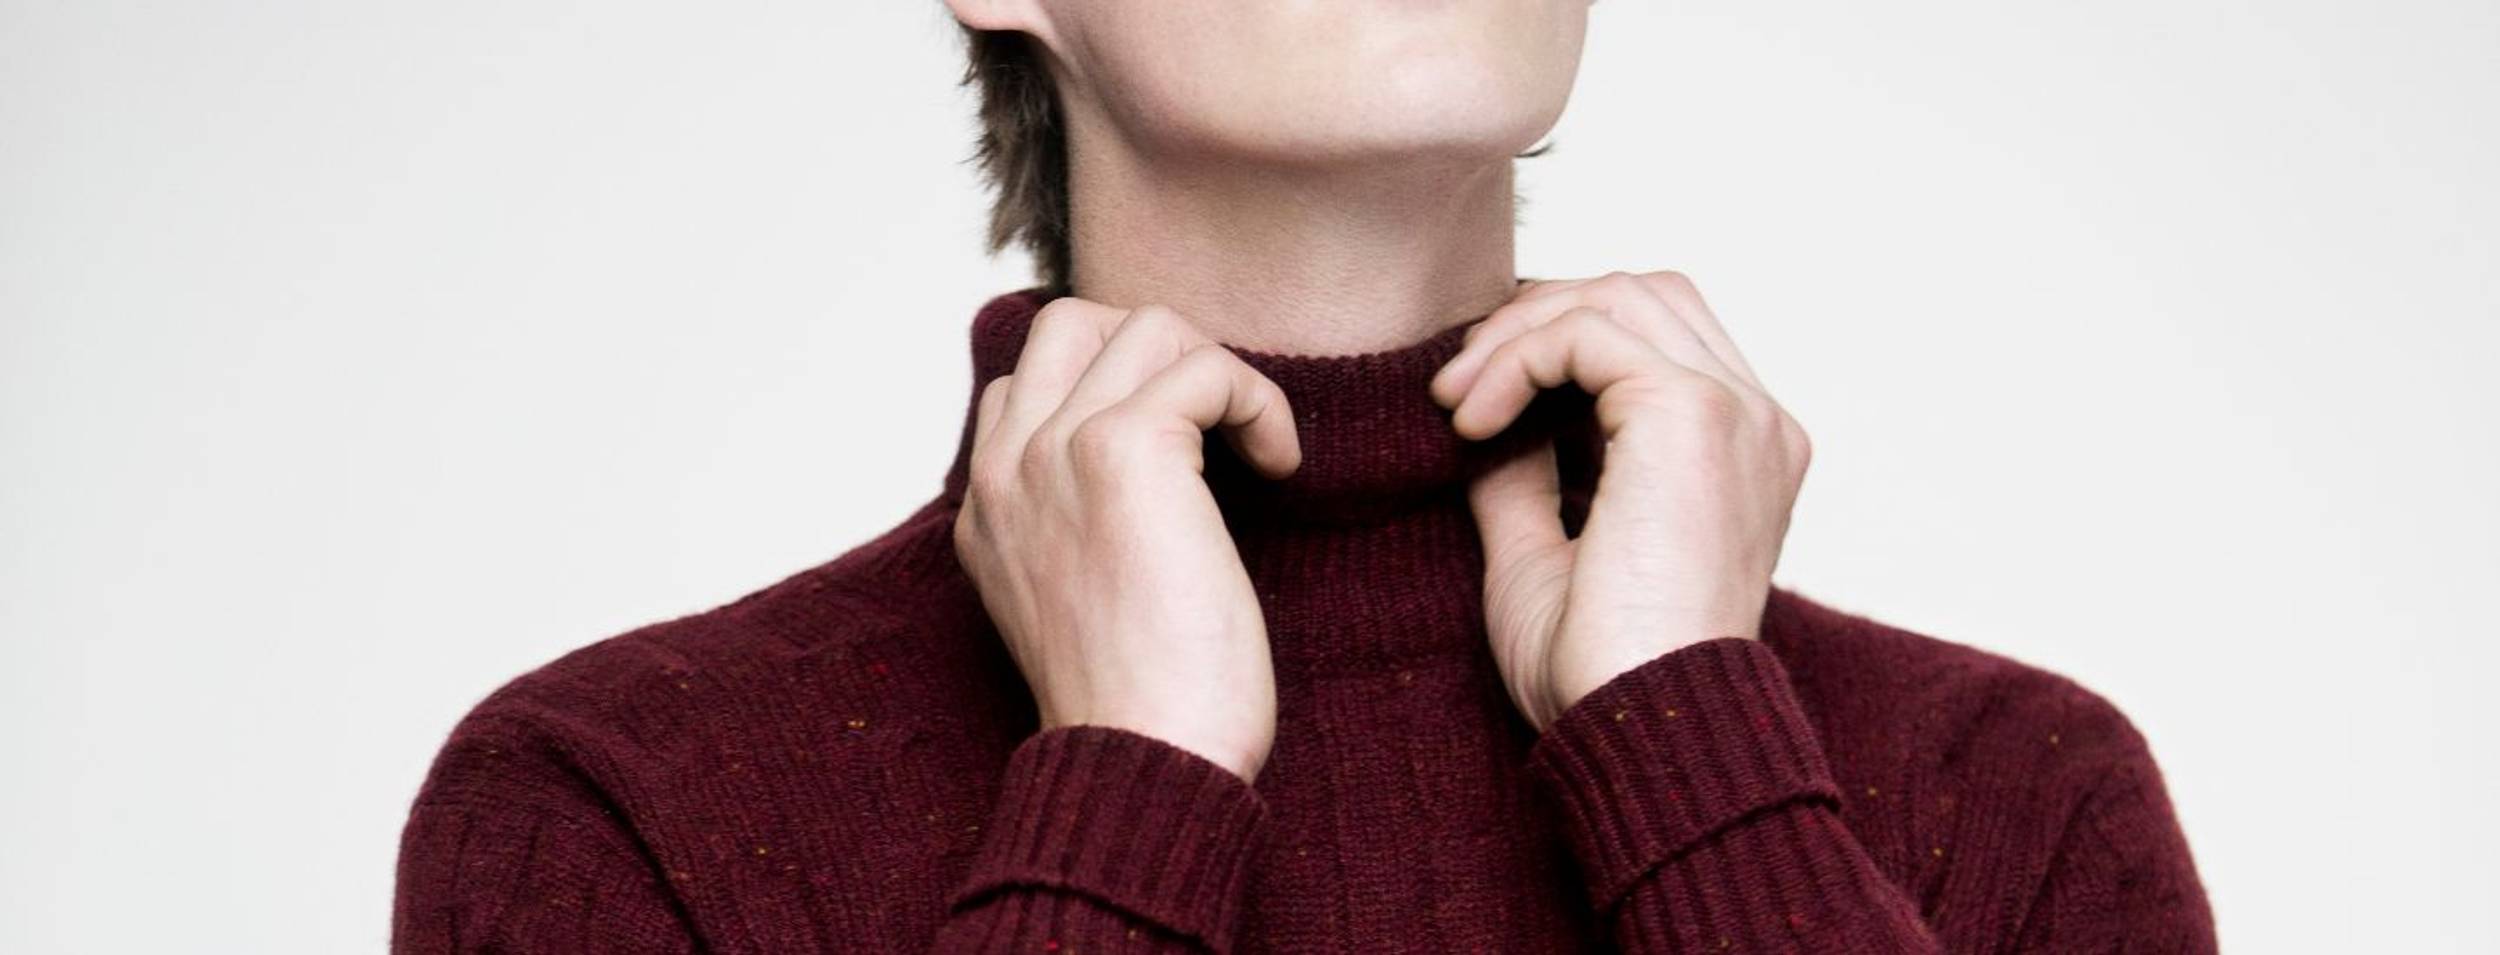 Knitwear Items Which Should be Part of Every Wardrobe